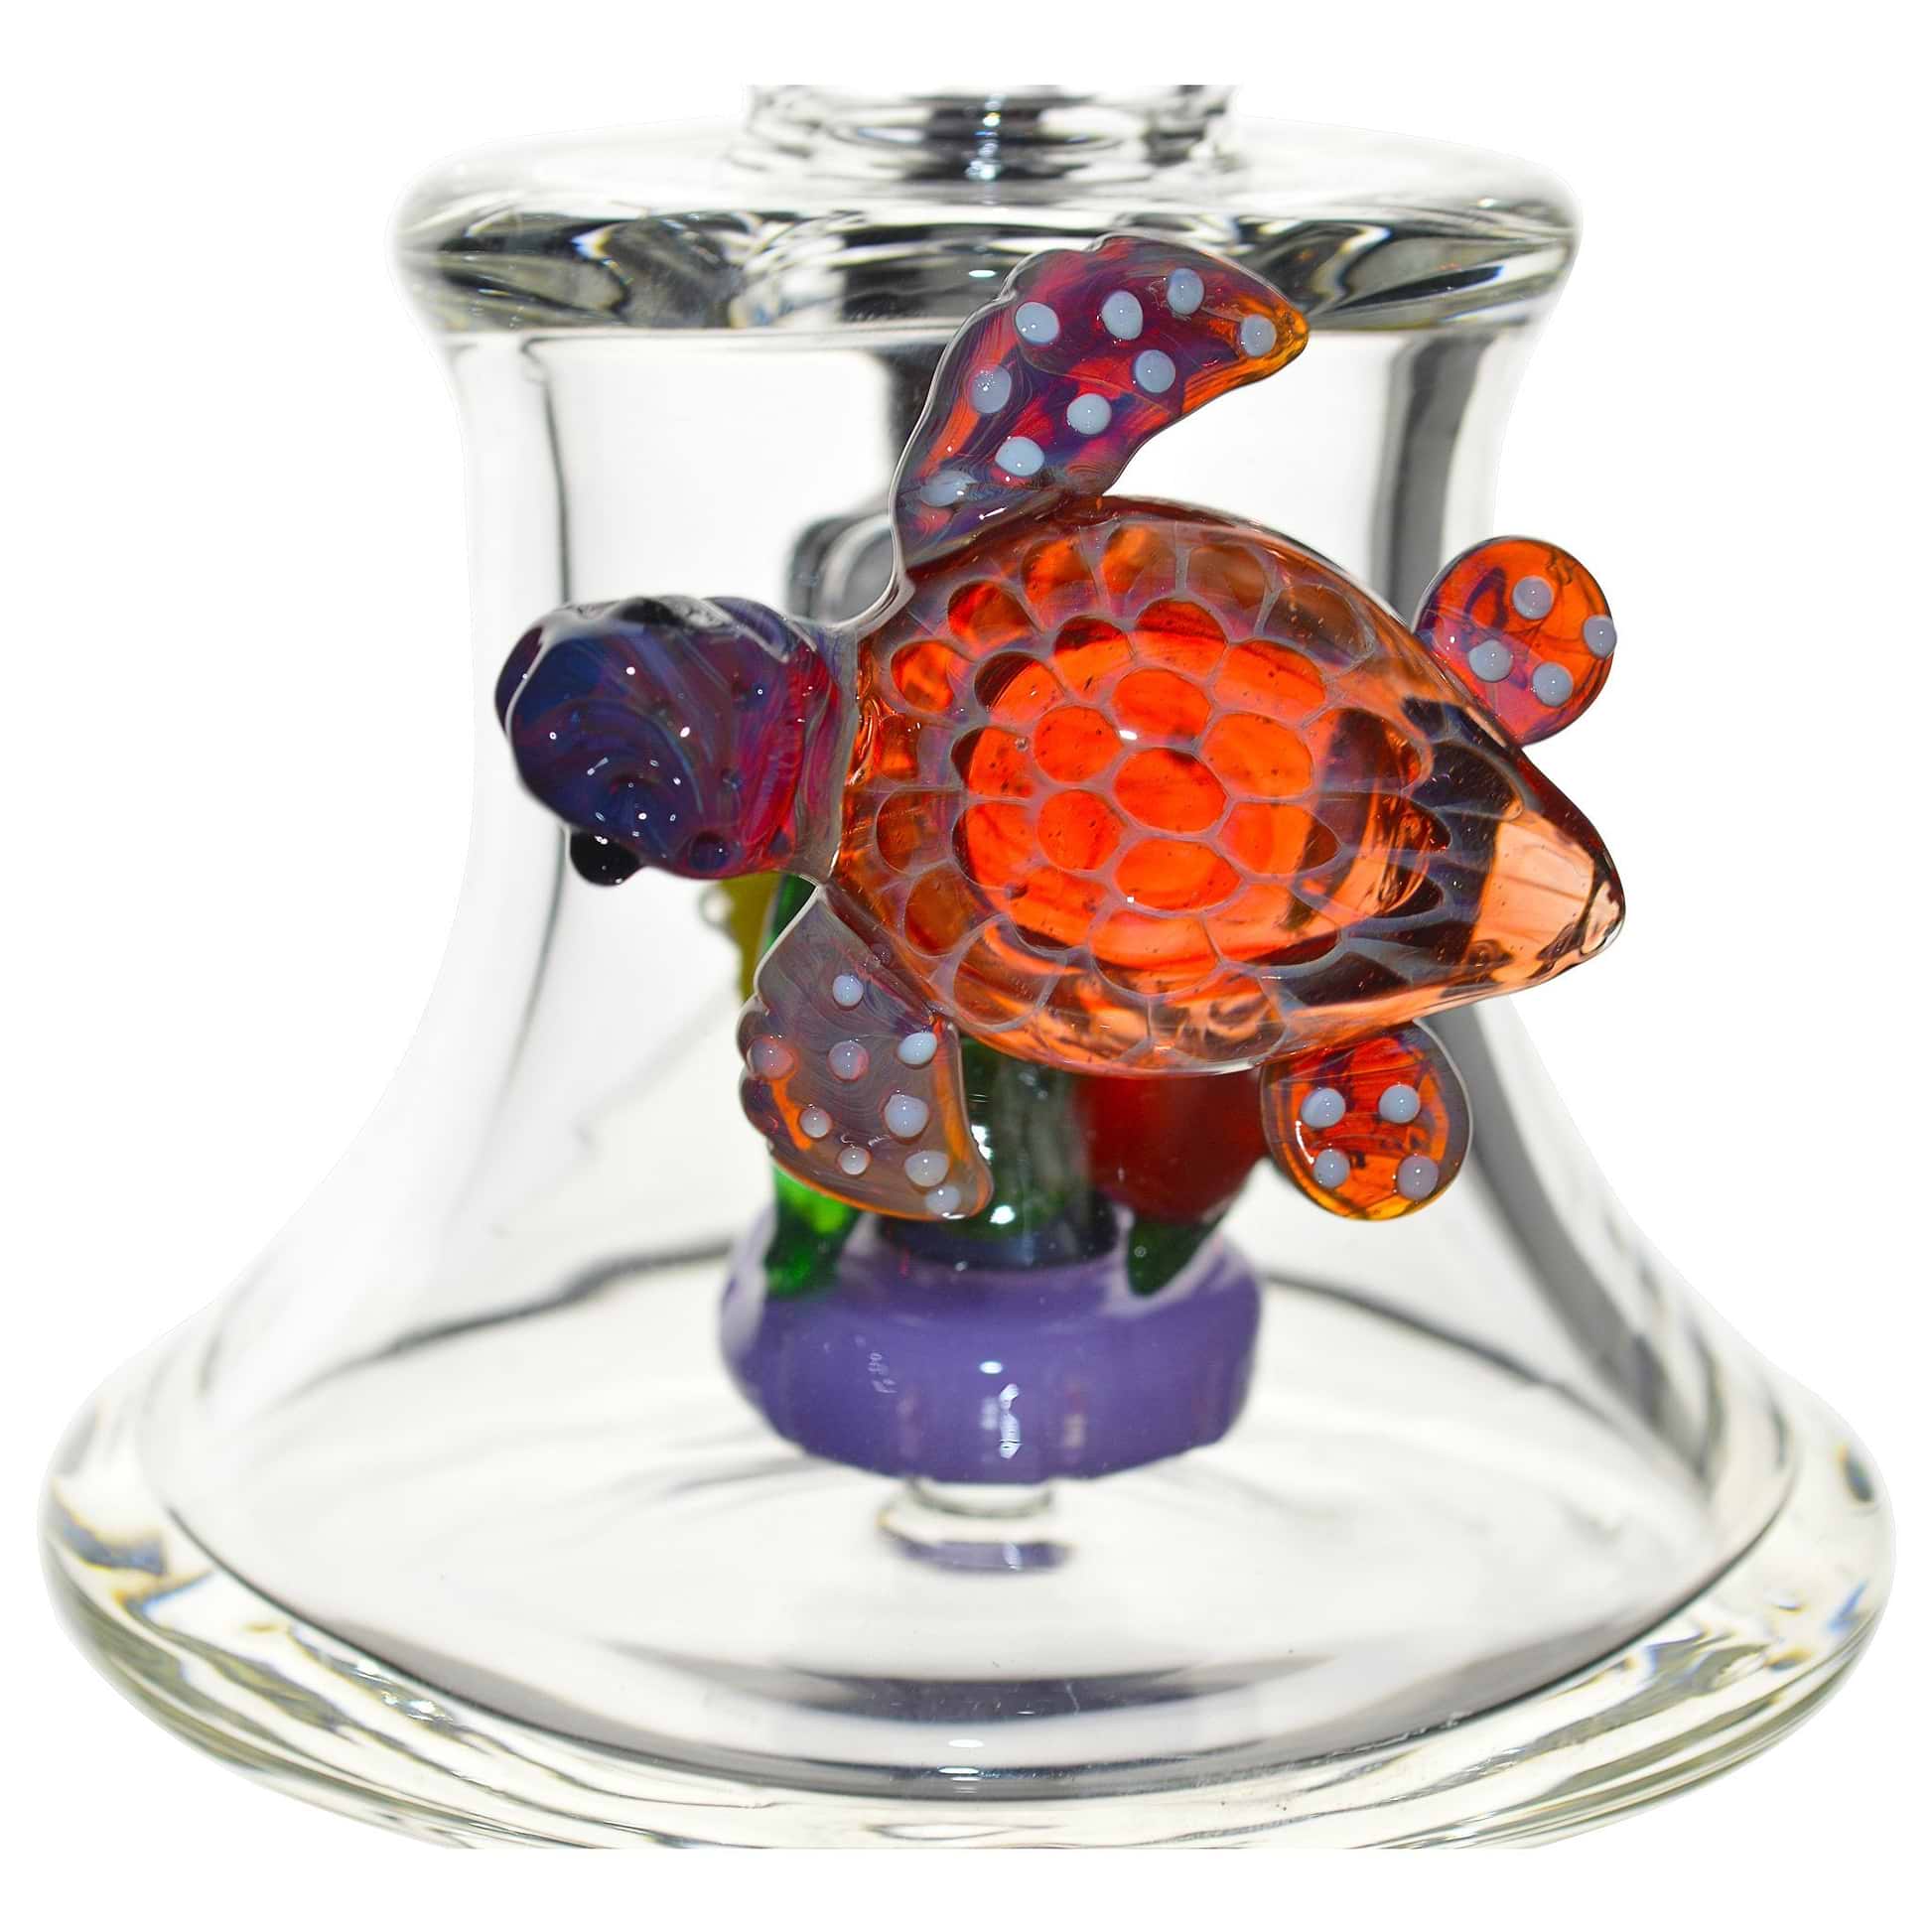 close up clear glass bong smoking device built-in ash catcher colorful turtle figure inside an aquarium look